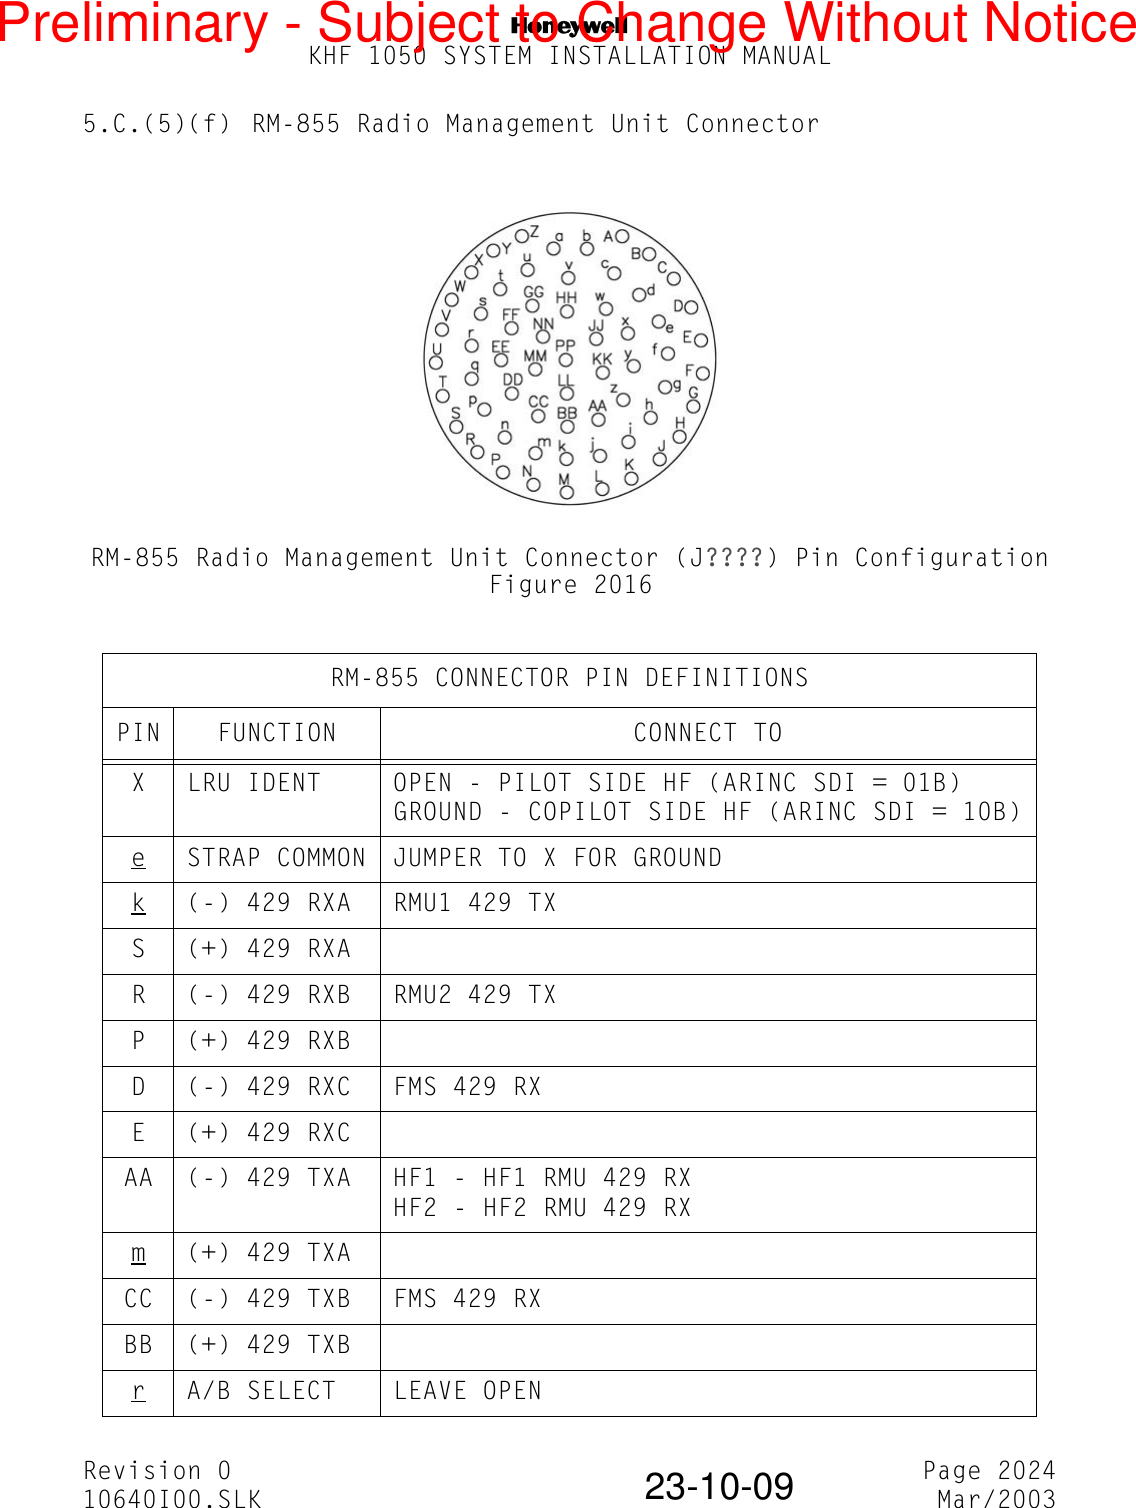 NKHF 1050 SYSTEM INSTALLATION MANUALRevision 0 Page 202410640I00.SLK Mar/200323-10-095.C.(5)(f) RM-855 Radio Management Unit ConnectorRM-855 Radio Management Unit Connector (J????) Pin ConfigurationFigure 2016RM-855 CONNECTOR PIN DEFINITIONSPIN FUNCTION CONNECT TOX LRU IDENT OPEN - PILOT SIDE HF (ARINC SDI = 01B)GROUND - COPILOT SIDE HF (ARINC SDI = 10B)eSTRAP COMMON JUMPER TO X FOR GROUNDk(-) 429 RXA RMU1 429 TXS (+) 429 RXAR (-) 429 RXB RMU2 429 TXP (+) 429 RXBD (-) 429 RXC FMS 429 RXE (+) 429 RXCAA (-) 429 TXA HF1 - HF1 RMU 429 RXHF2 - HF2 RMU 429 RXm(+) 429 TXACC (-) 429 TXB FMS 429 RXBB (+) 429 TXBrA/B SELECT LEAVE OPENPreliminary - Subject to Change Without Notice